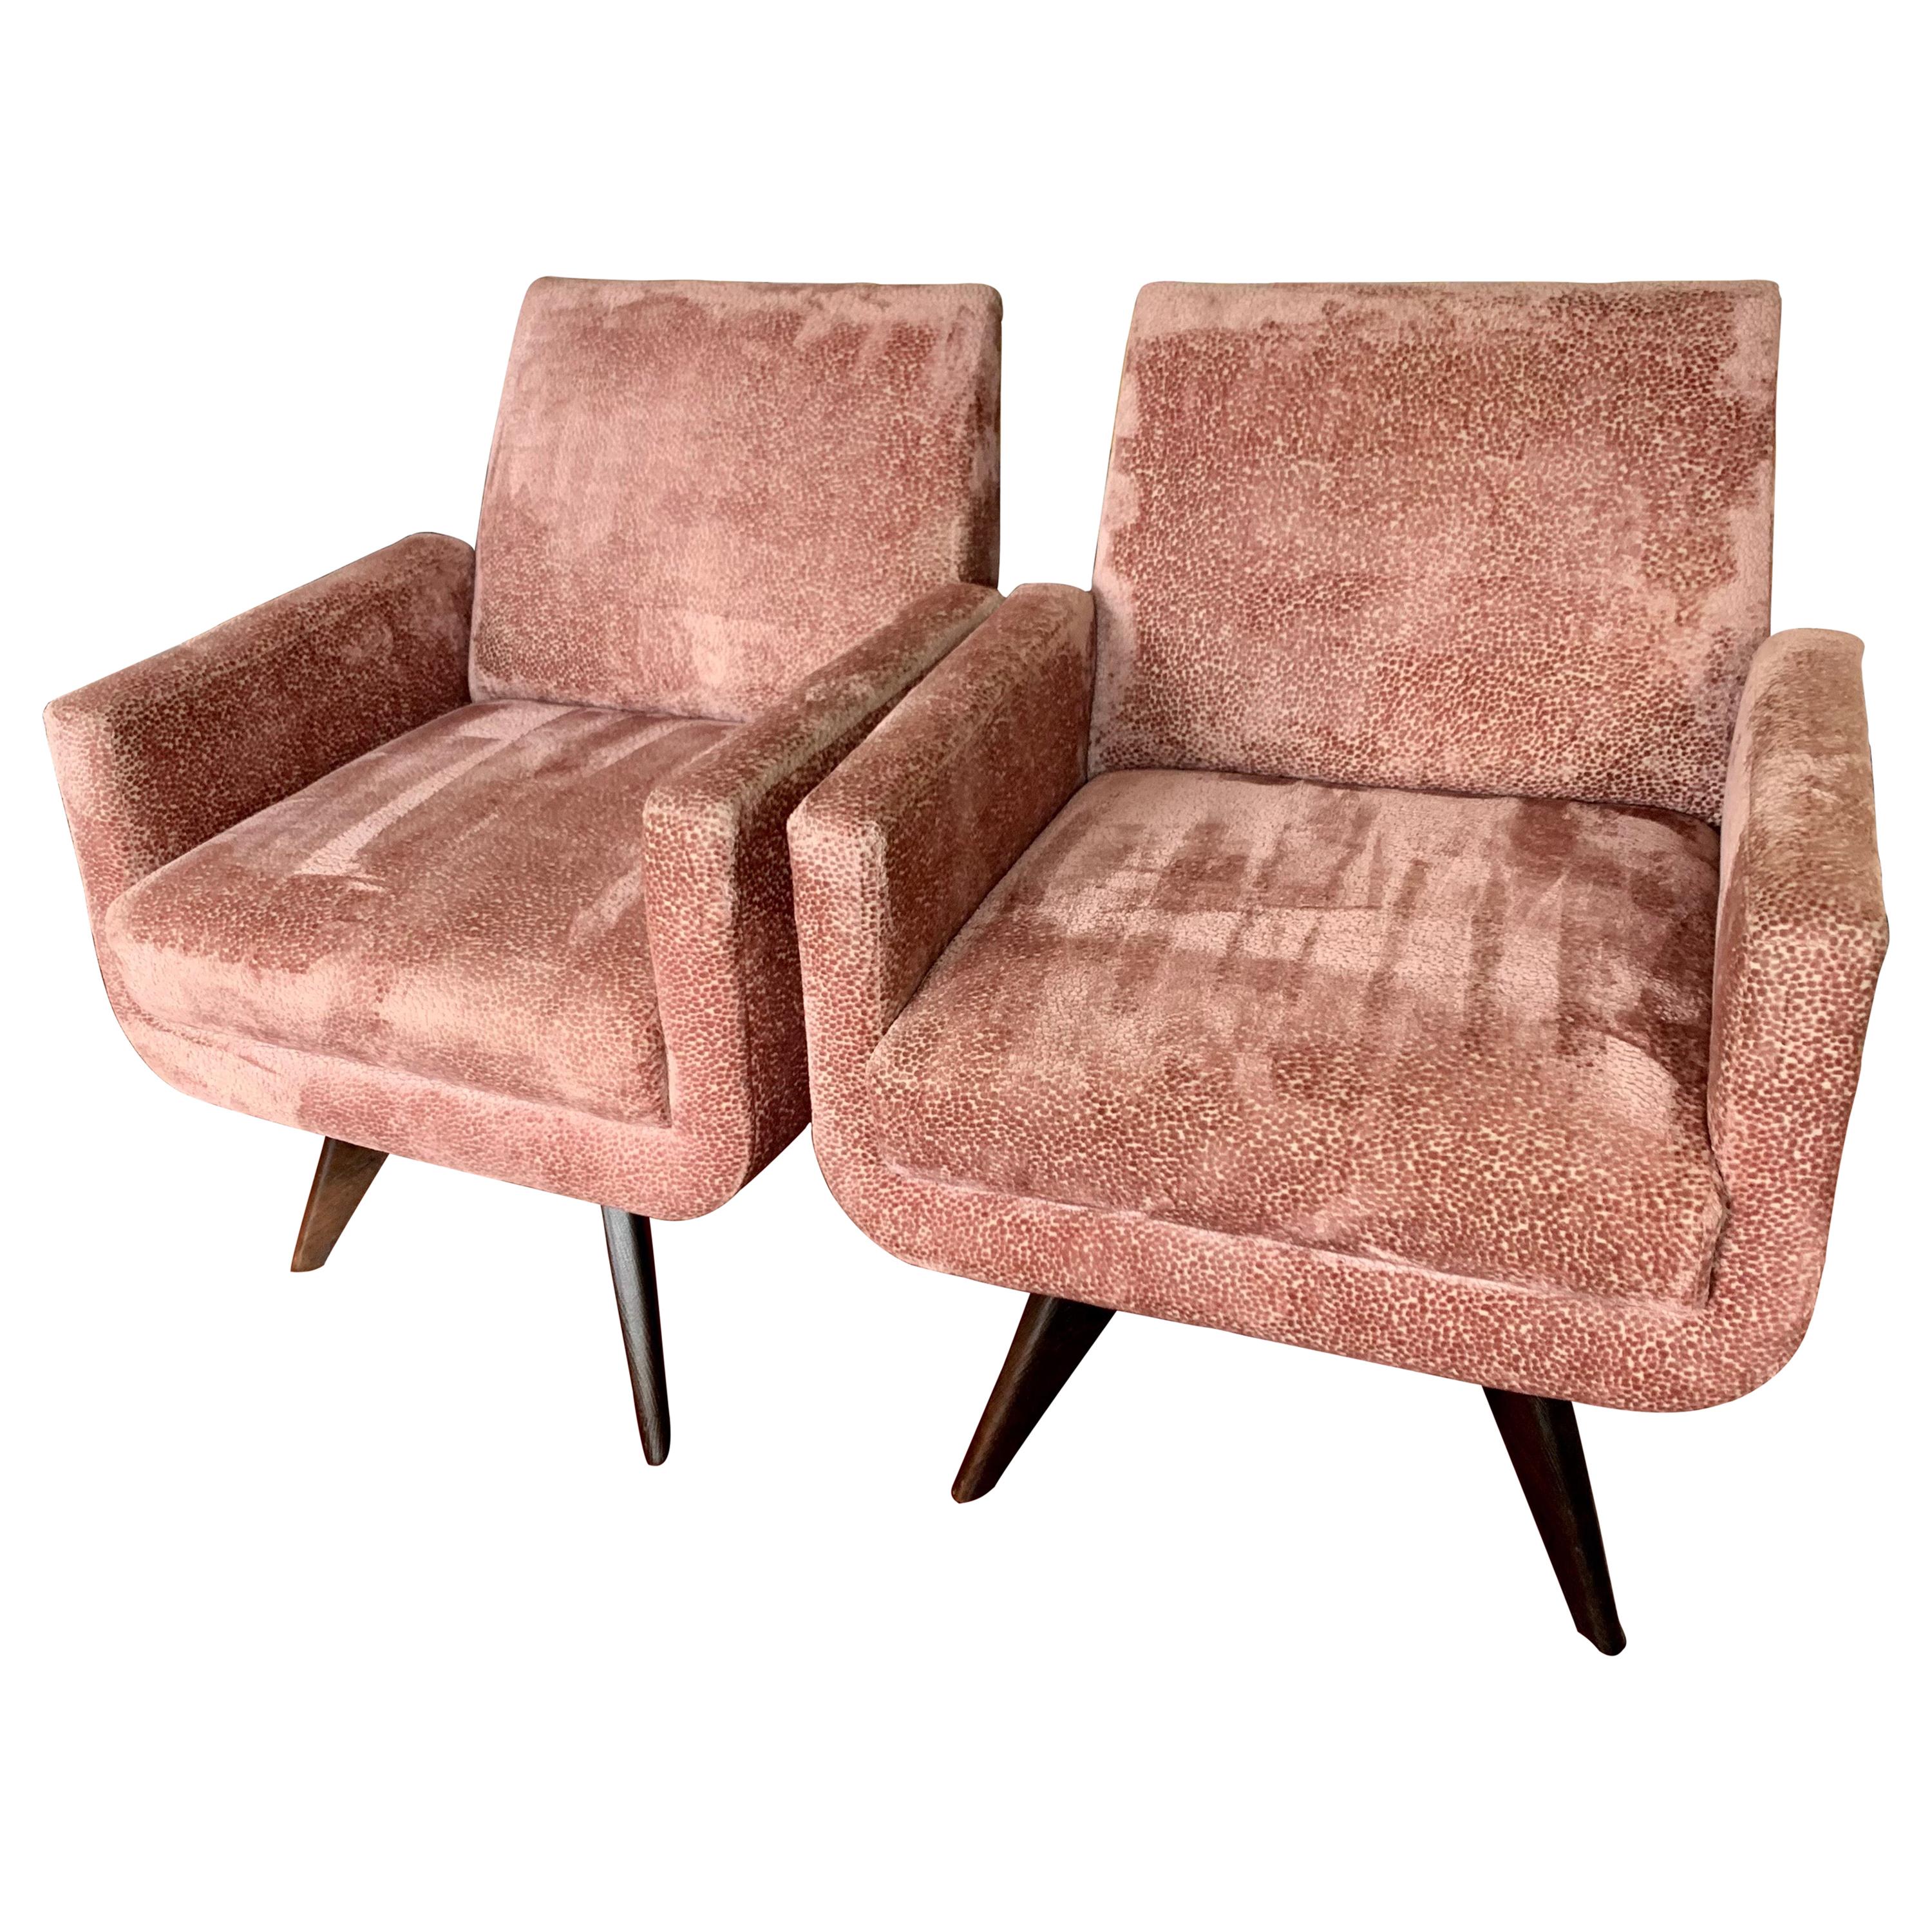 Pair of Tall Midcentury Style Swivel Chairs with New Salmon Velvet Upholstery